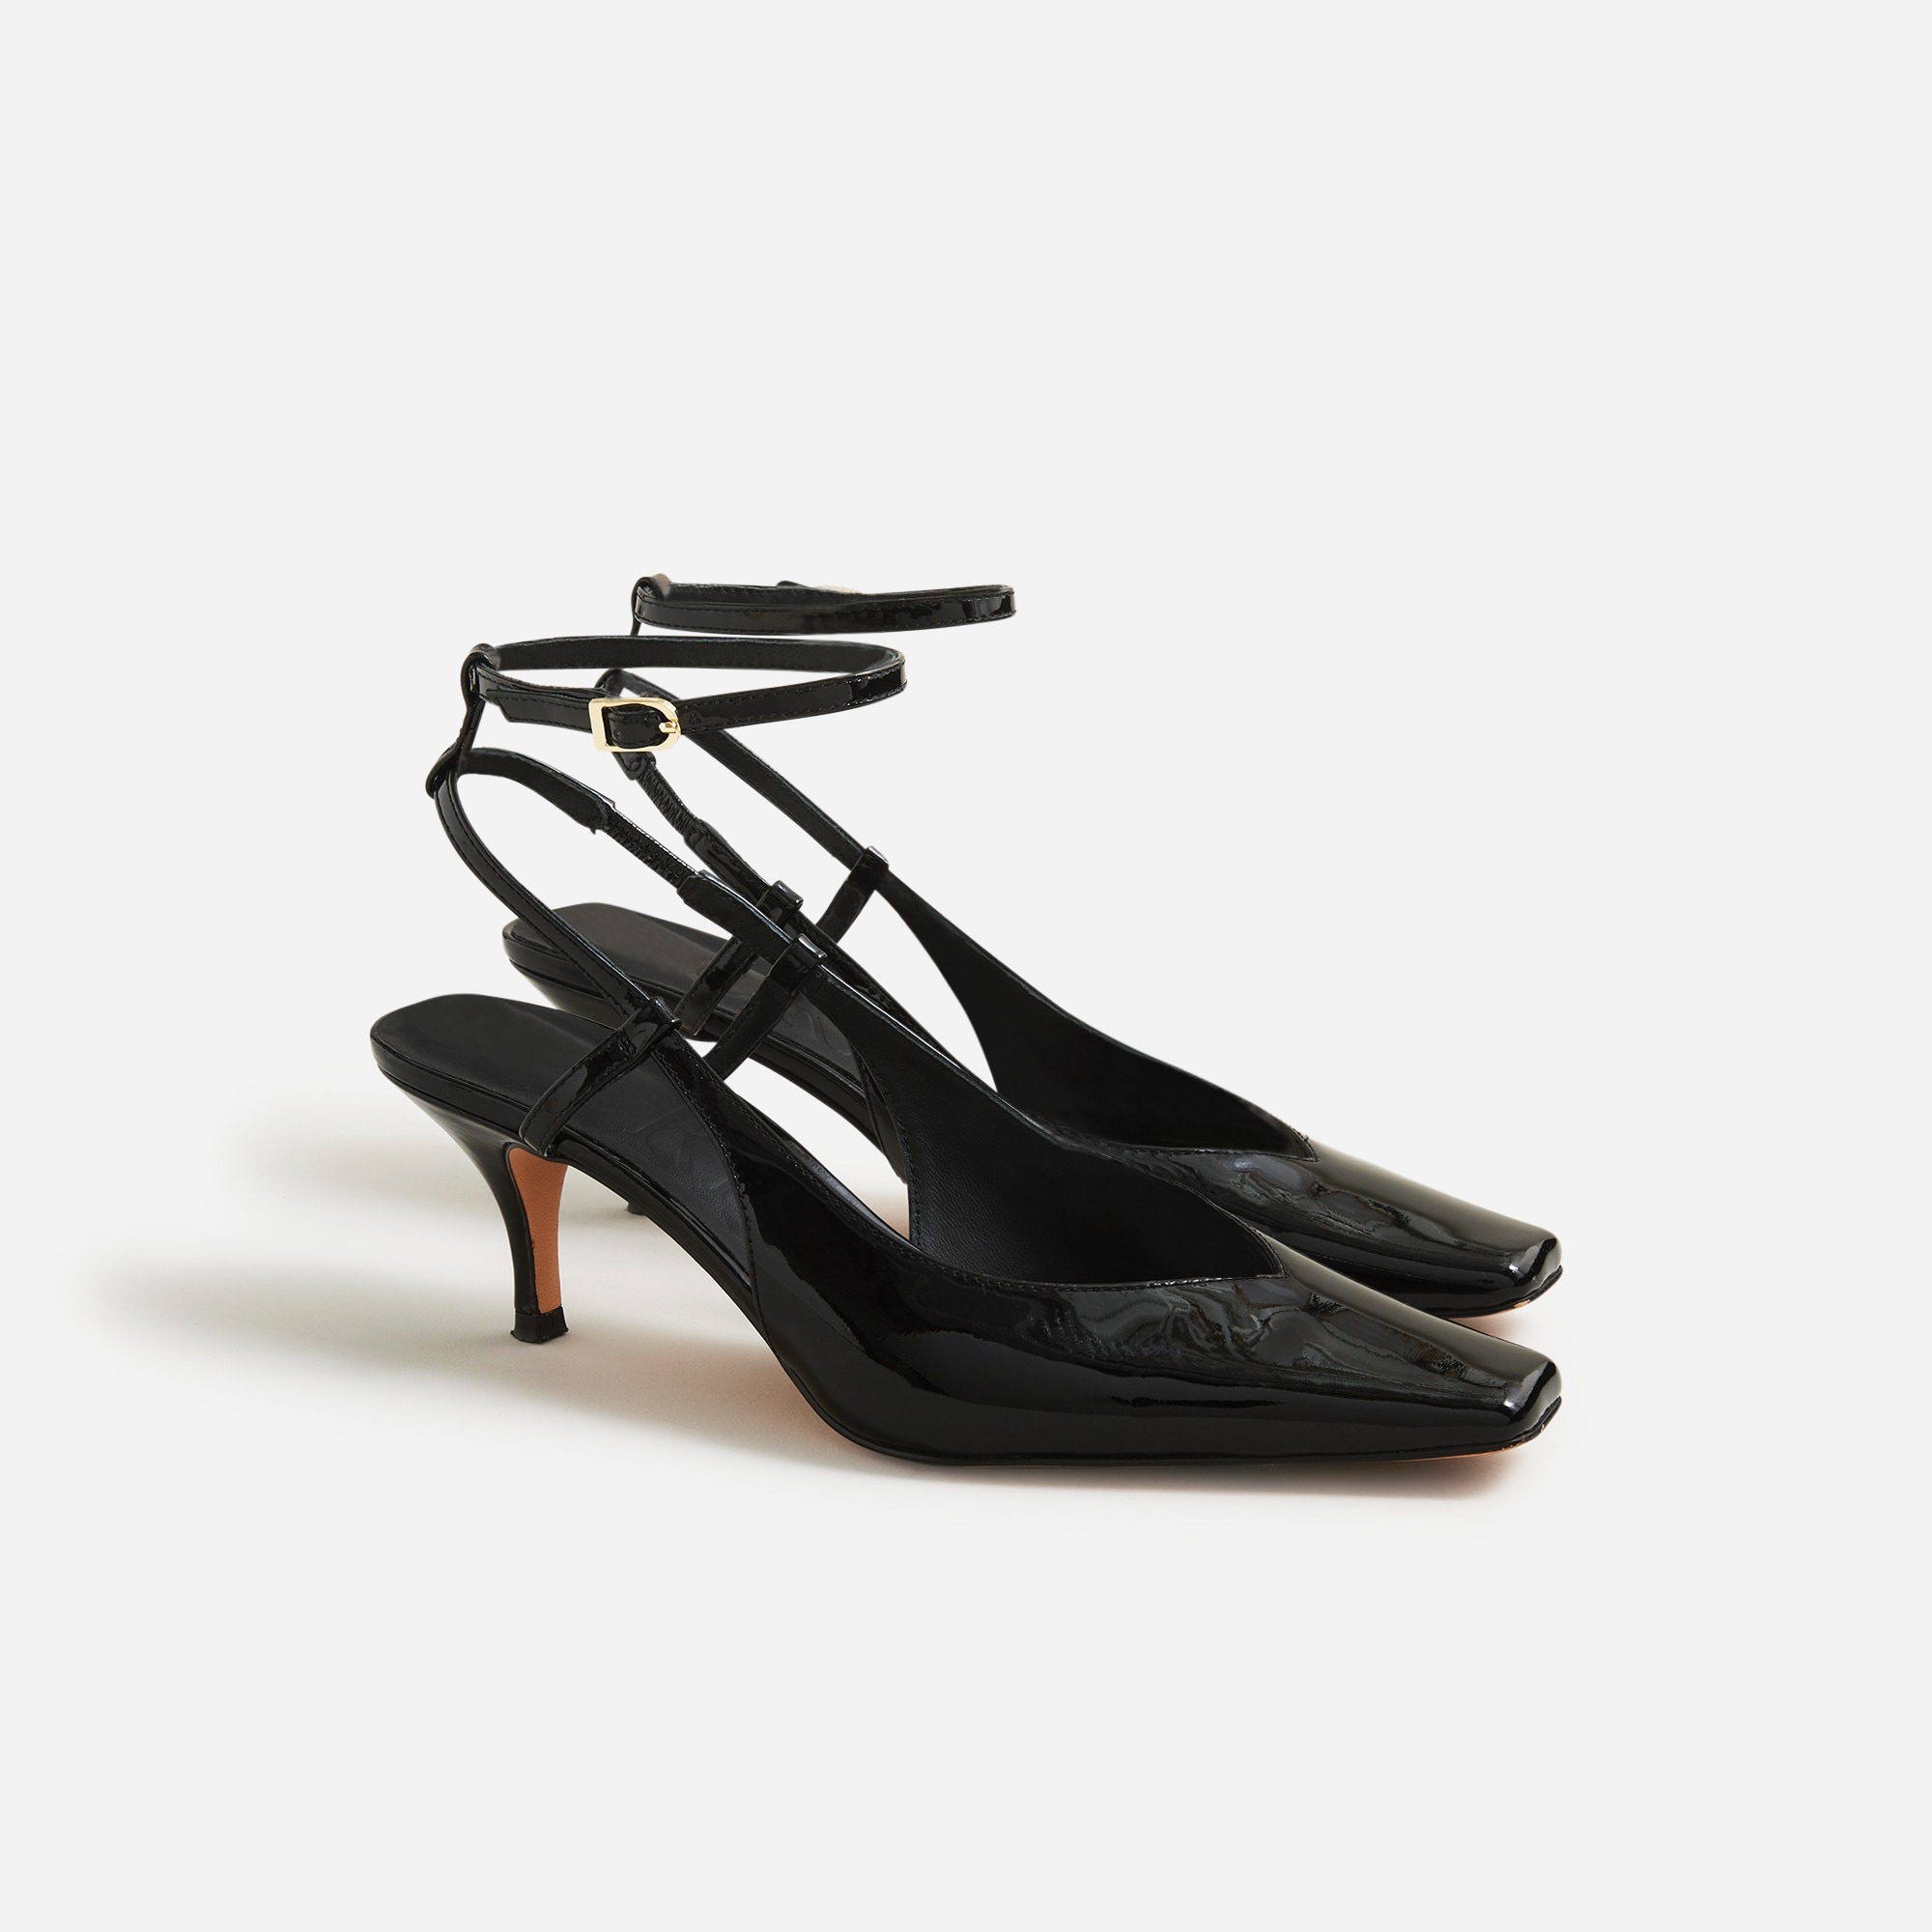  Leona ankle-strap heels in patent leather